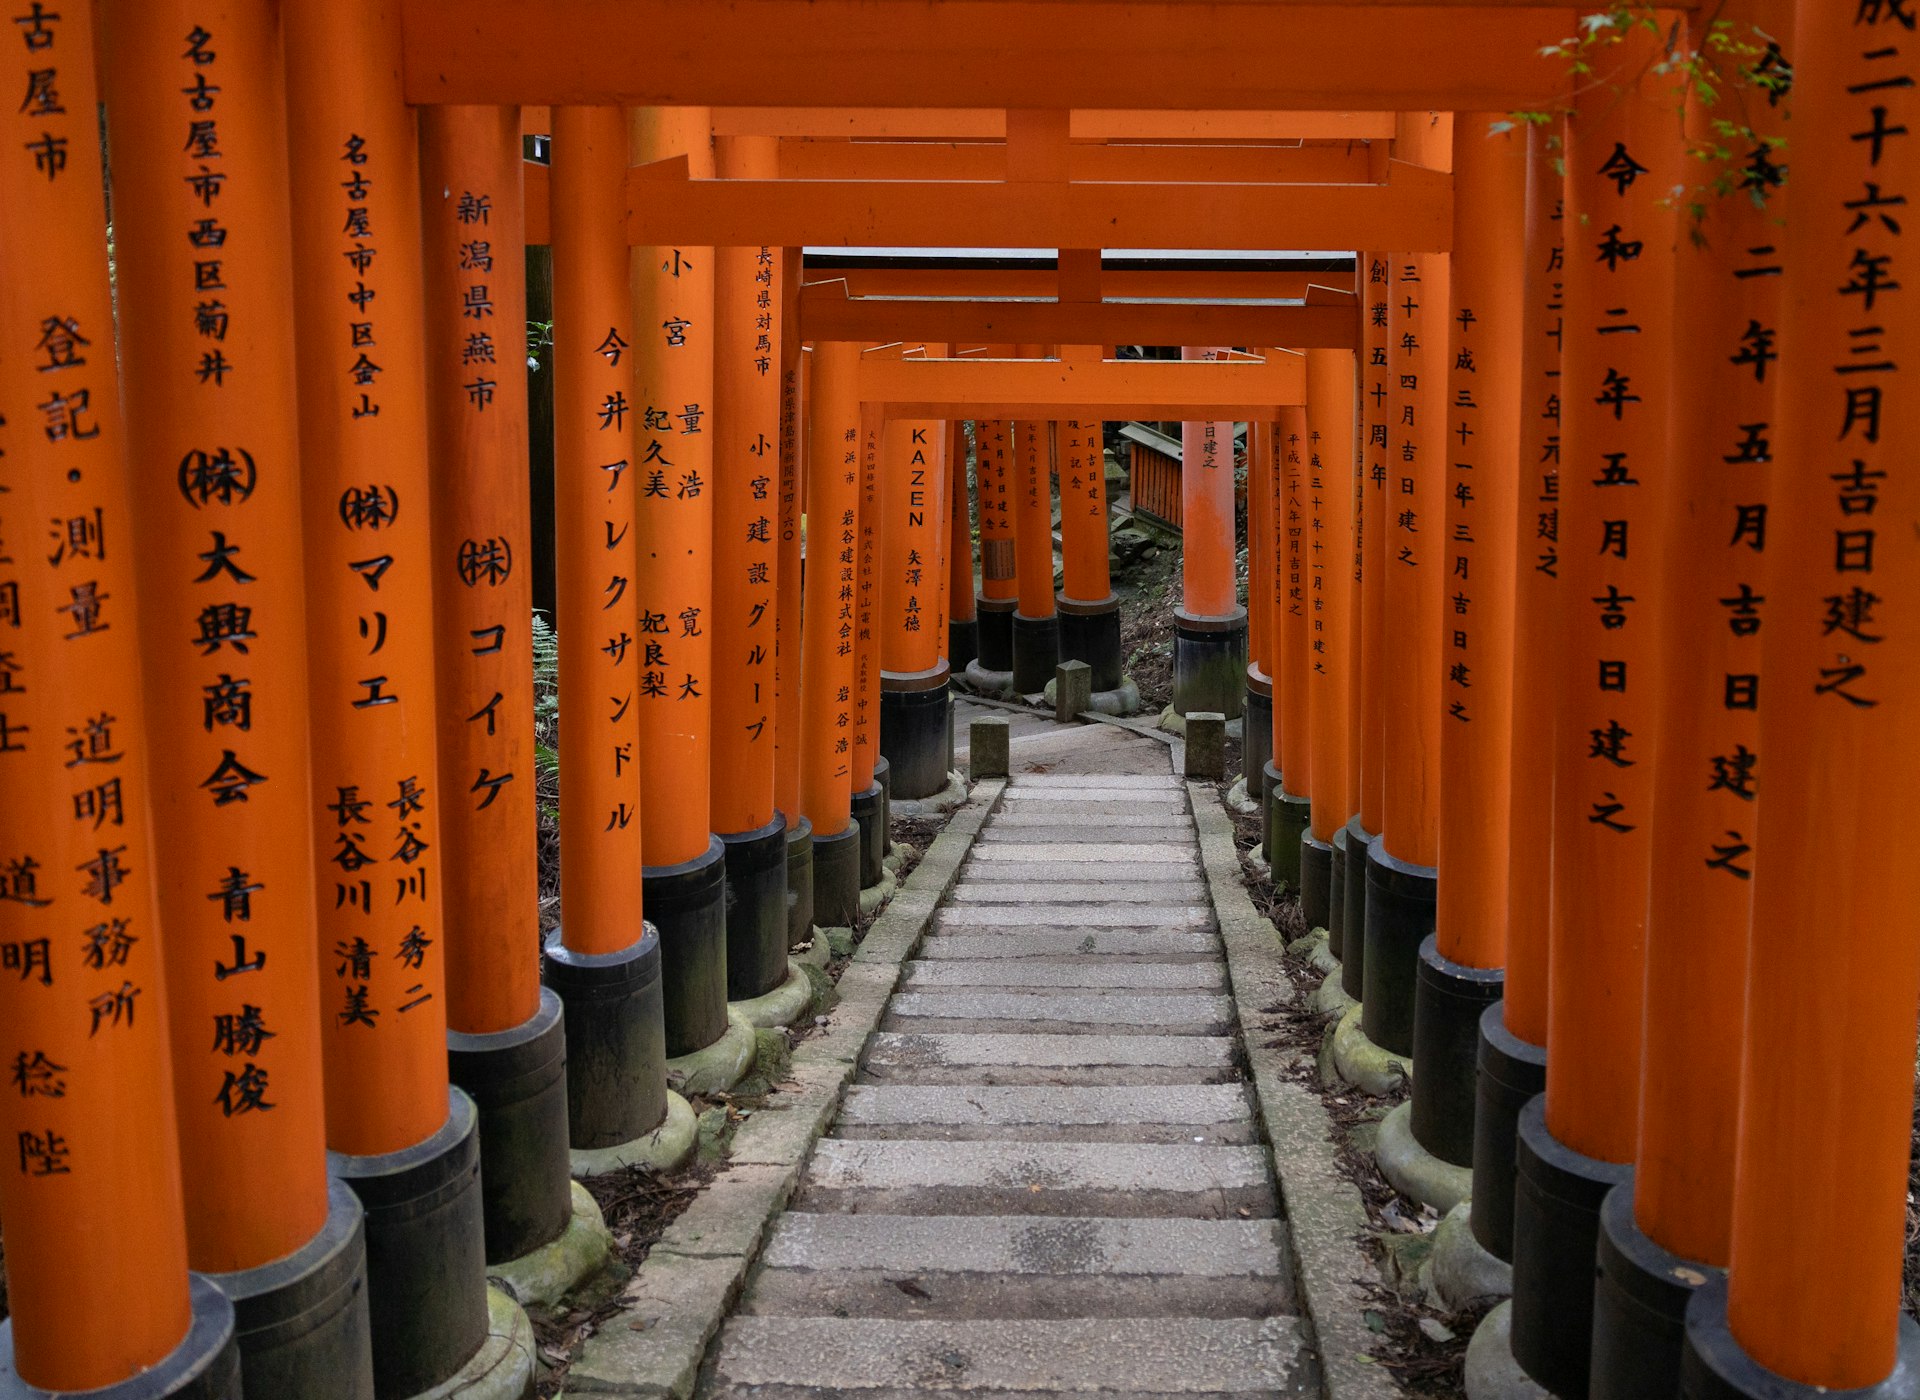 Continuous red gates of Fushimi Inari over a stone path, creating a tunnel-like effect